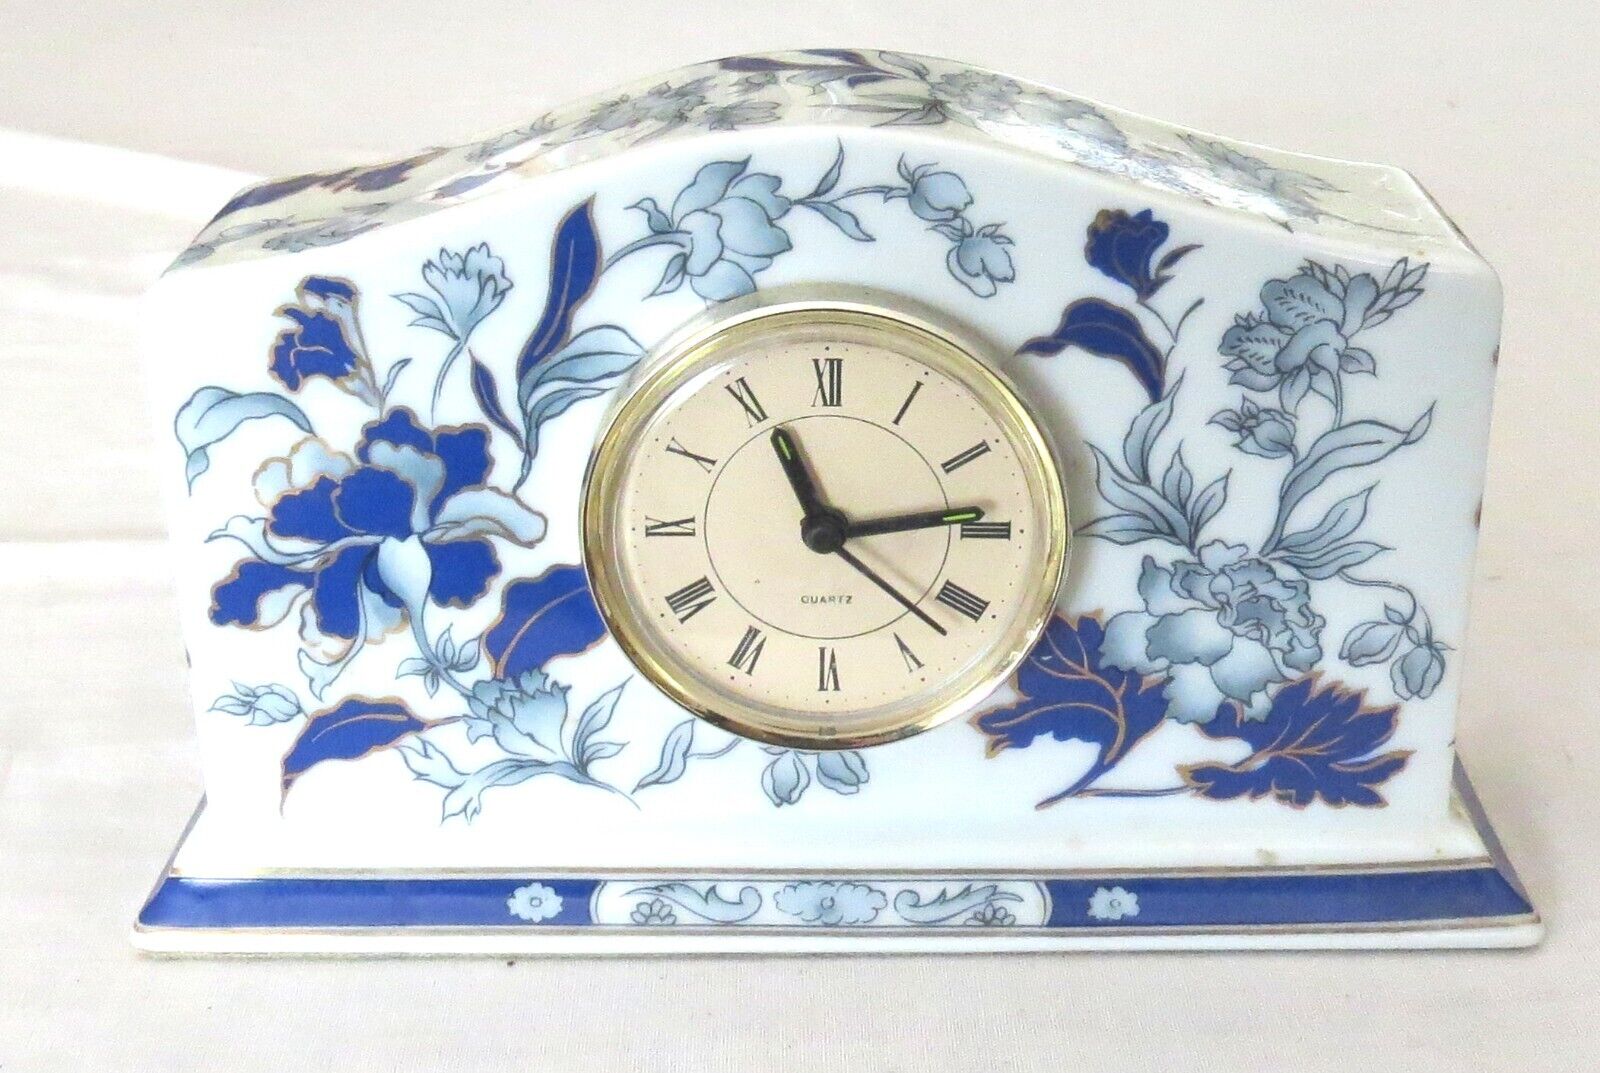 Italix Ceramic Floral Clock Limited Edition 2.25 by 4.5 by 7.75 inches.